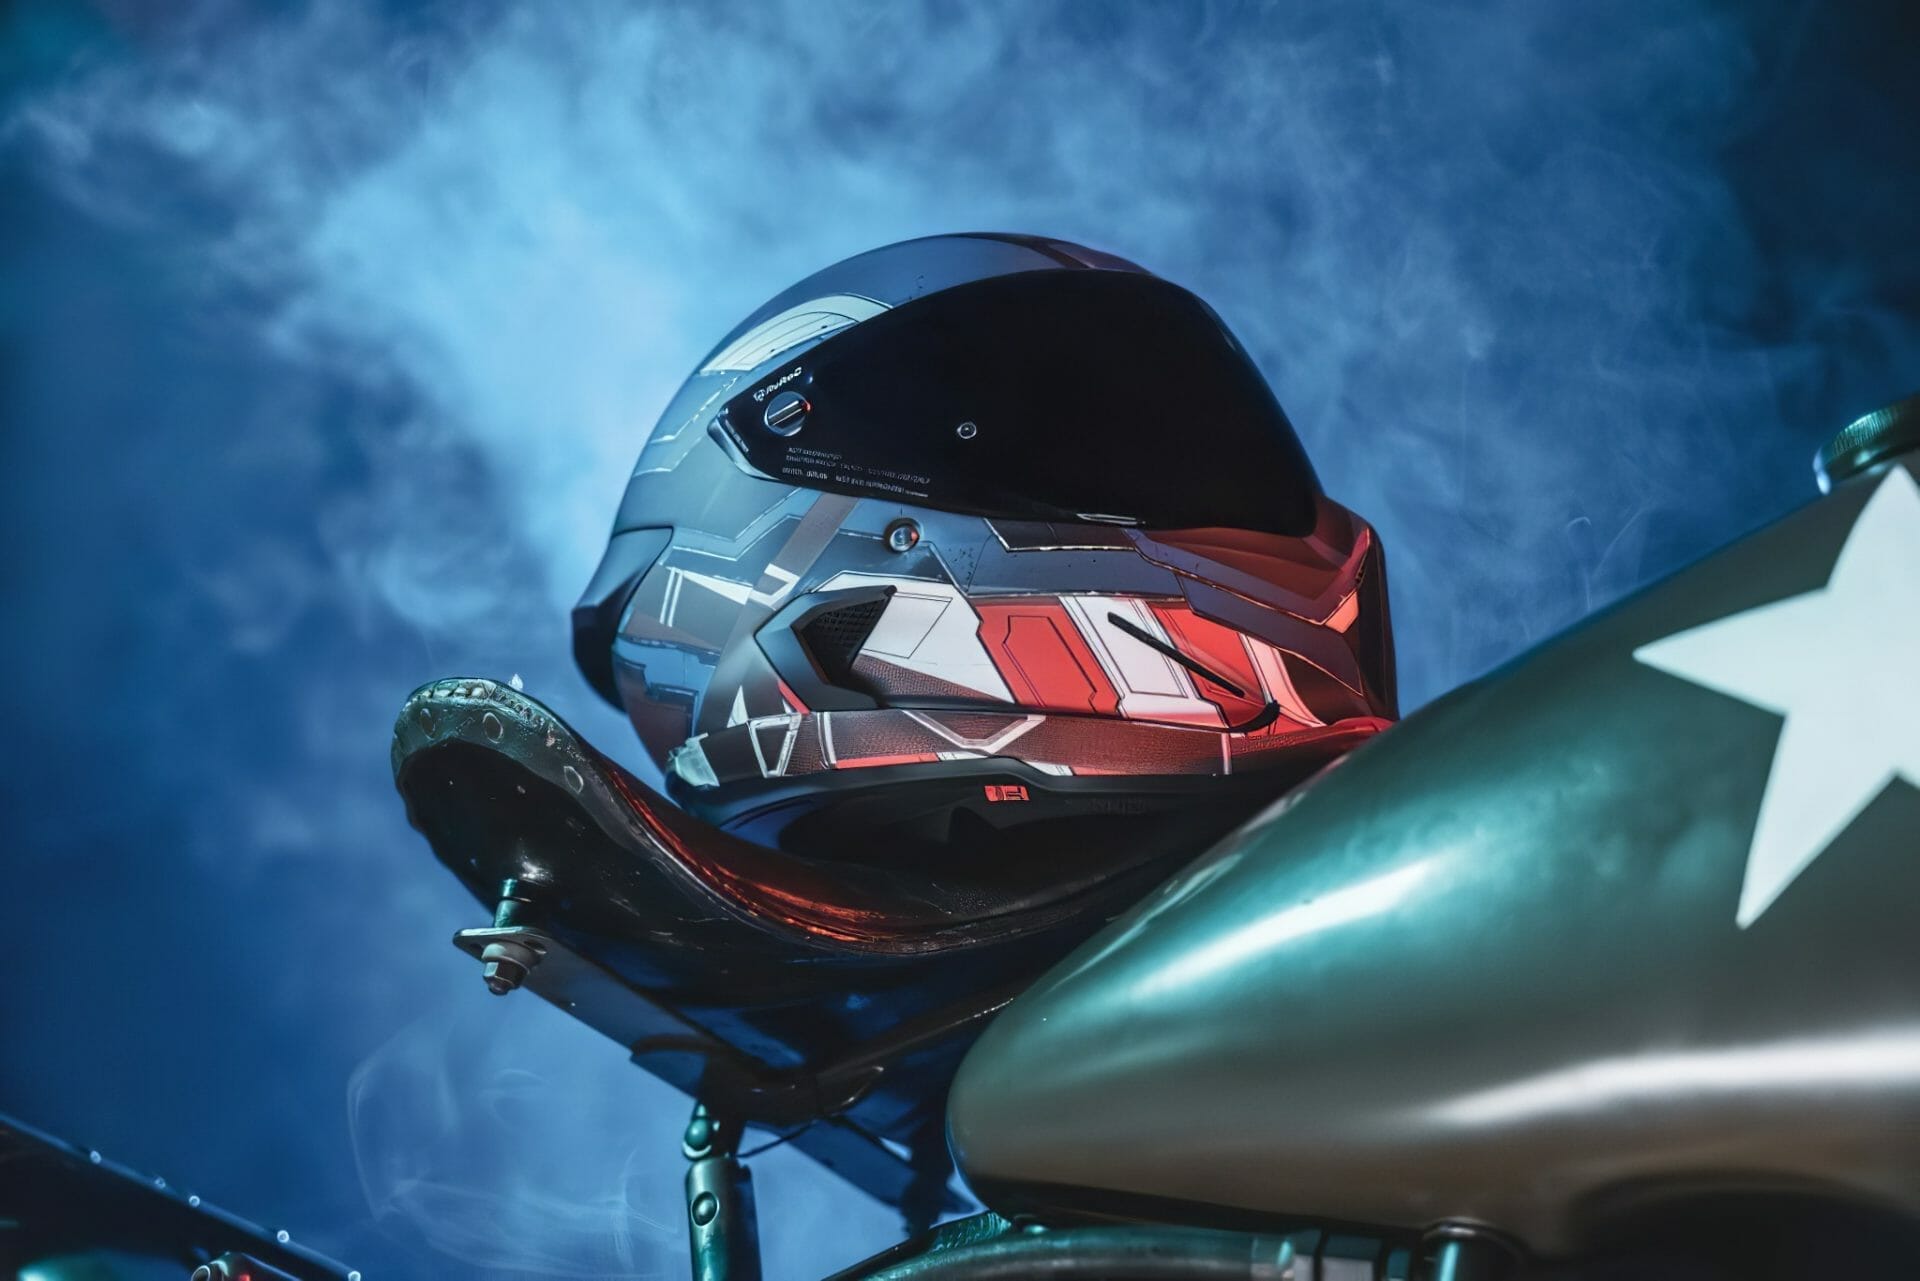 The Ruroc Marvel Avengers collection: superheroes meet motorcycle technology